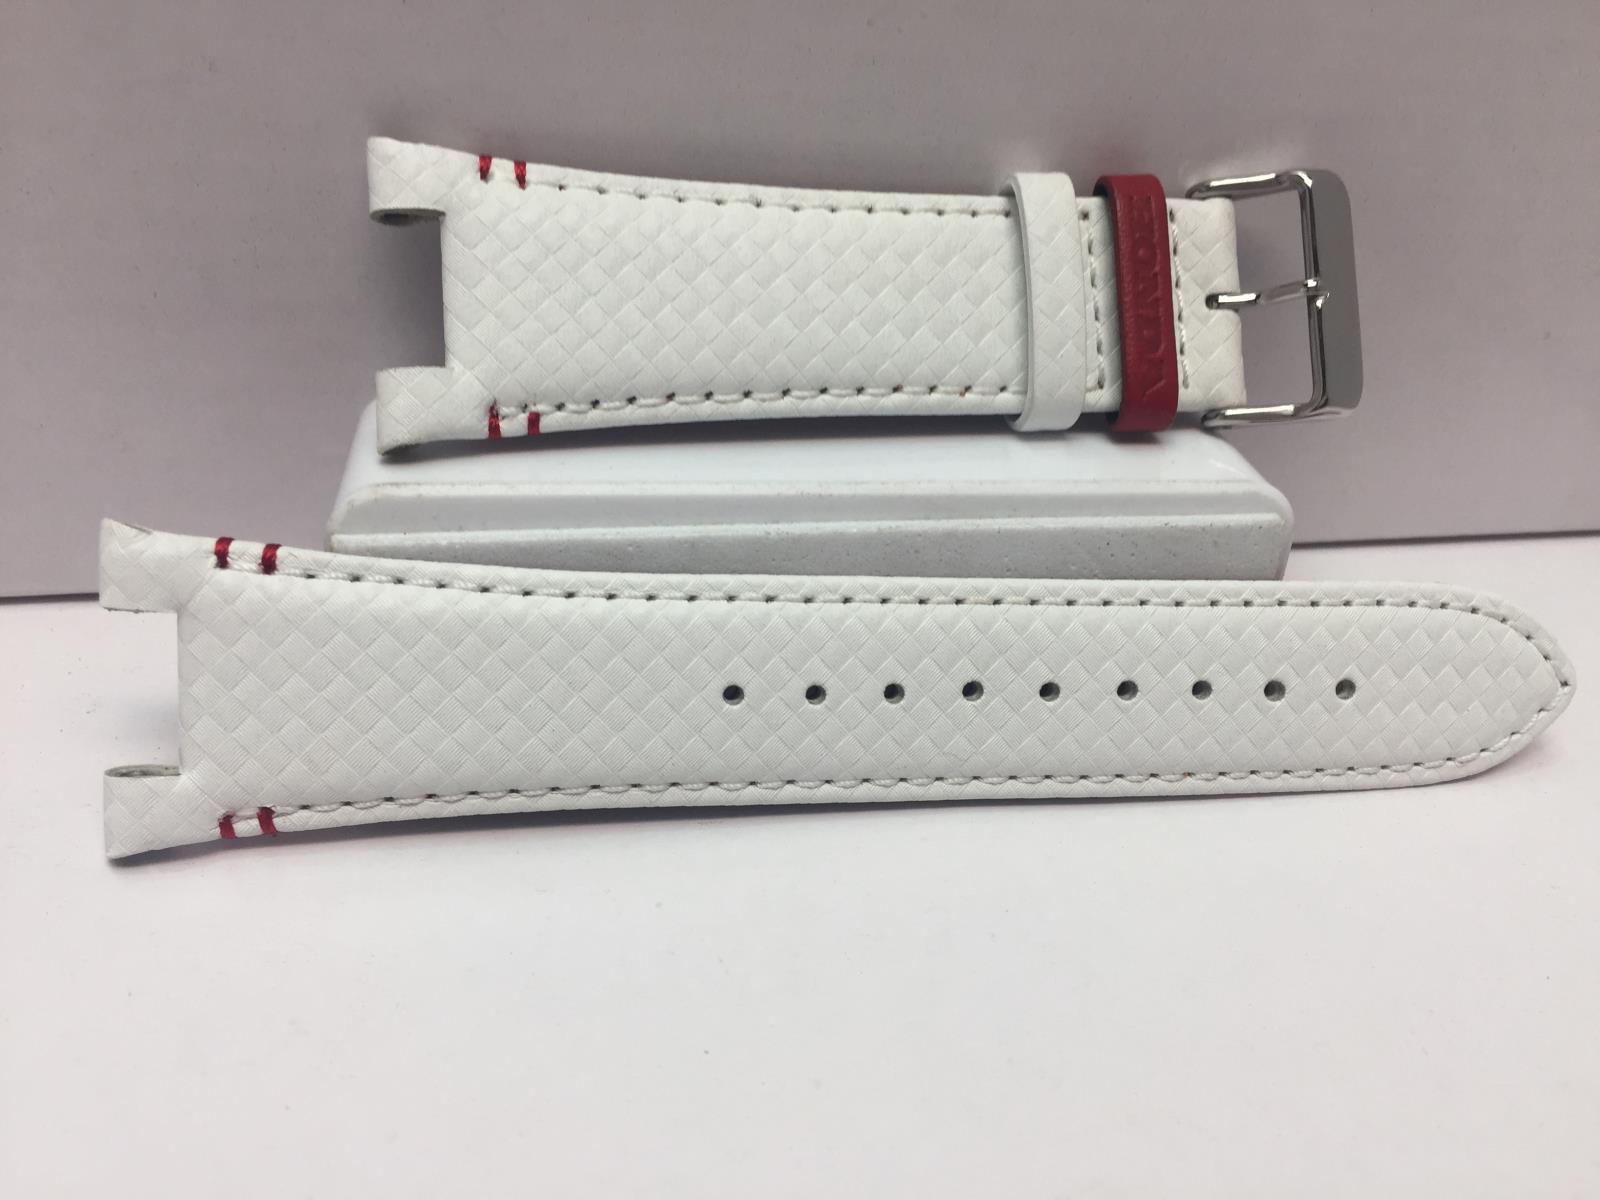 Casio Watchband Leather EQS-800 HR-1A Wht Outline Stitched Red Trim.Honda Keeper